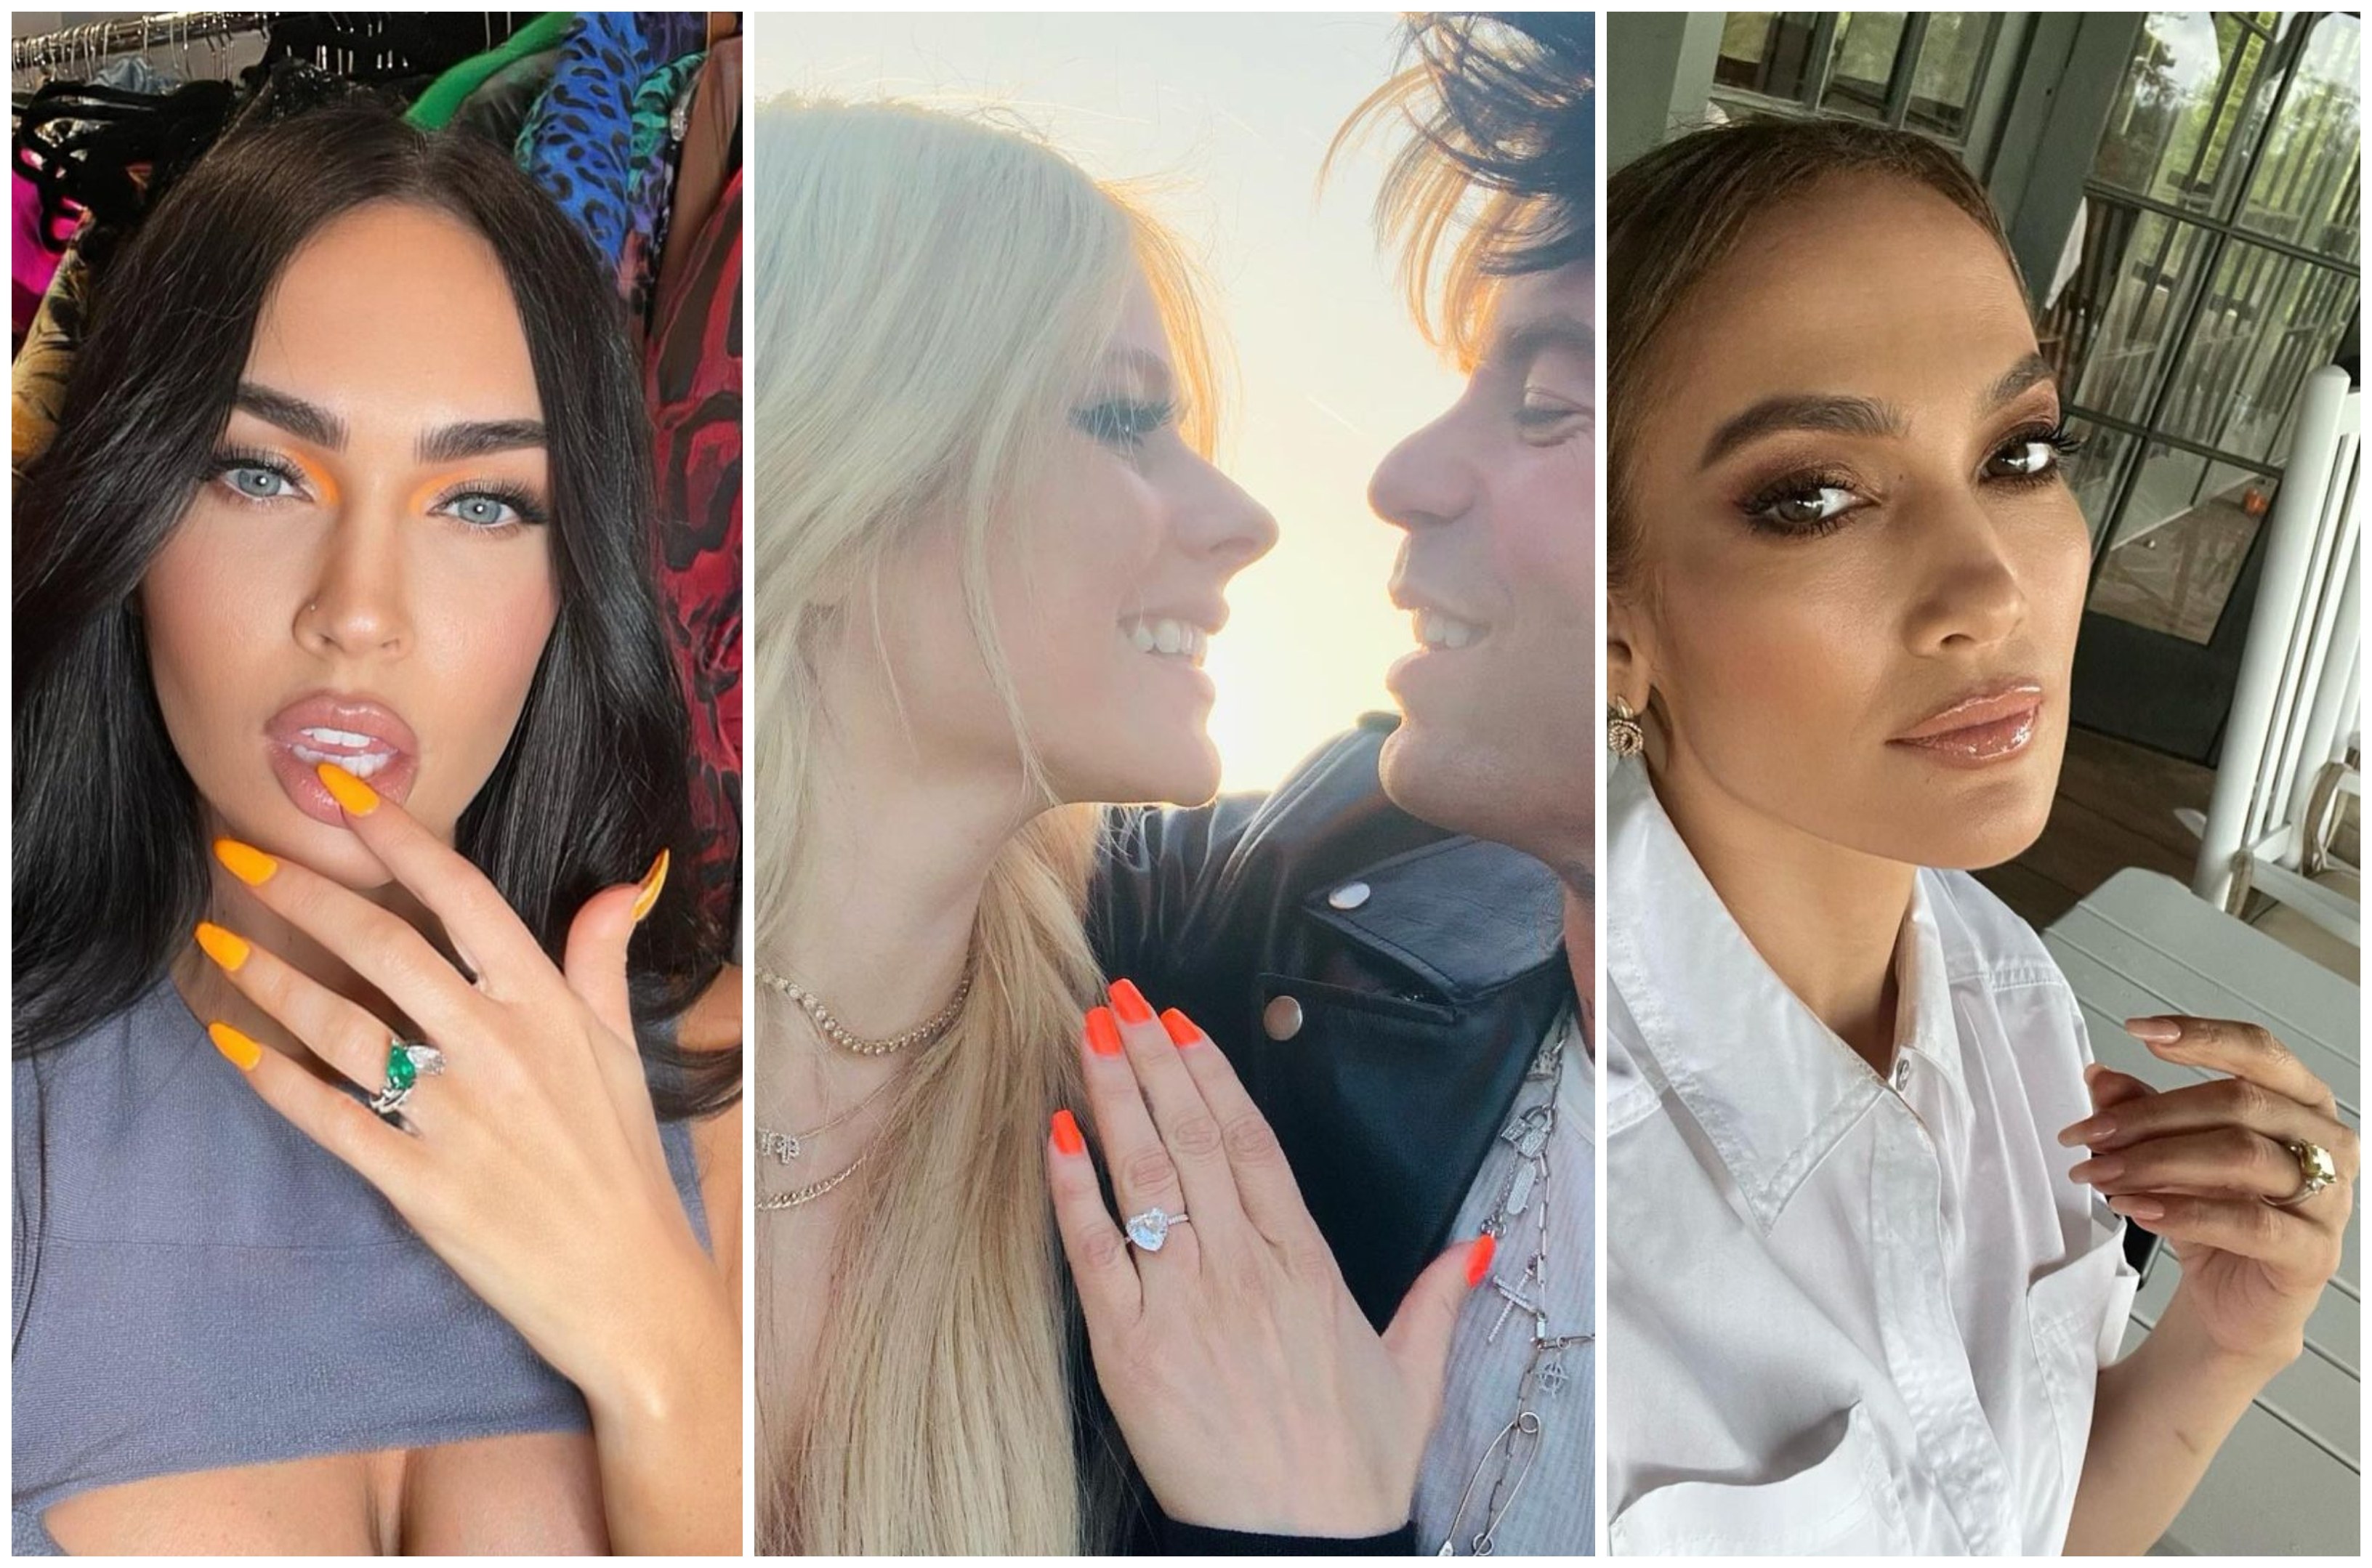 Megan Fox, Avril Lavigne and Jennifer Lopez showed off their engagement rings this year. Photos: @avrillavigne, @jlo, @meganfox/Instagram